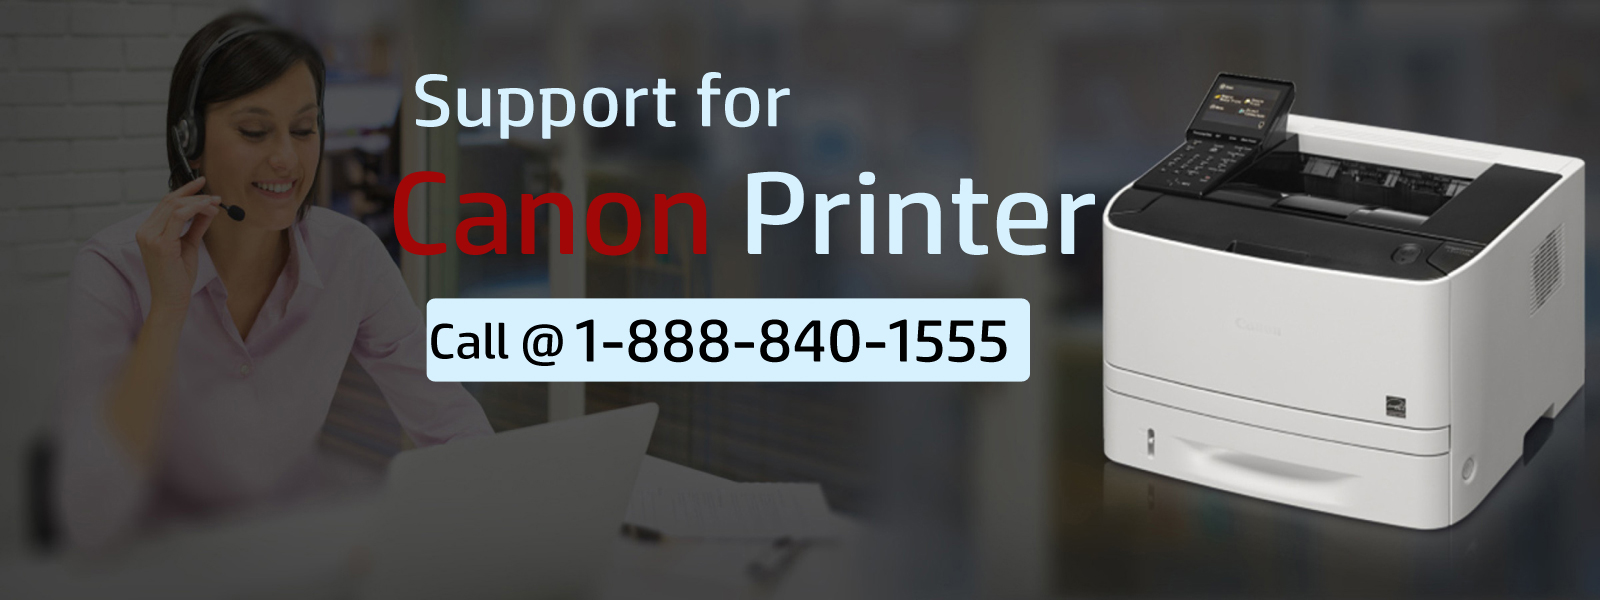 canon printer help support